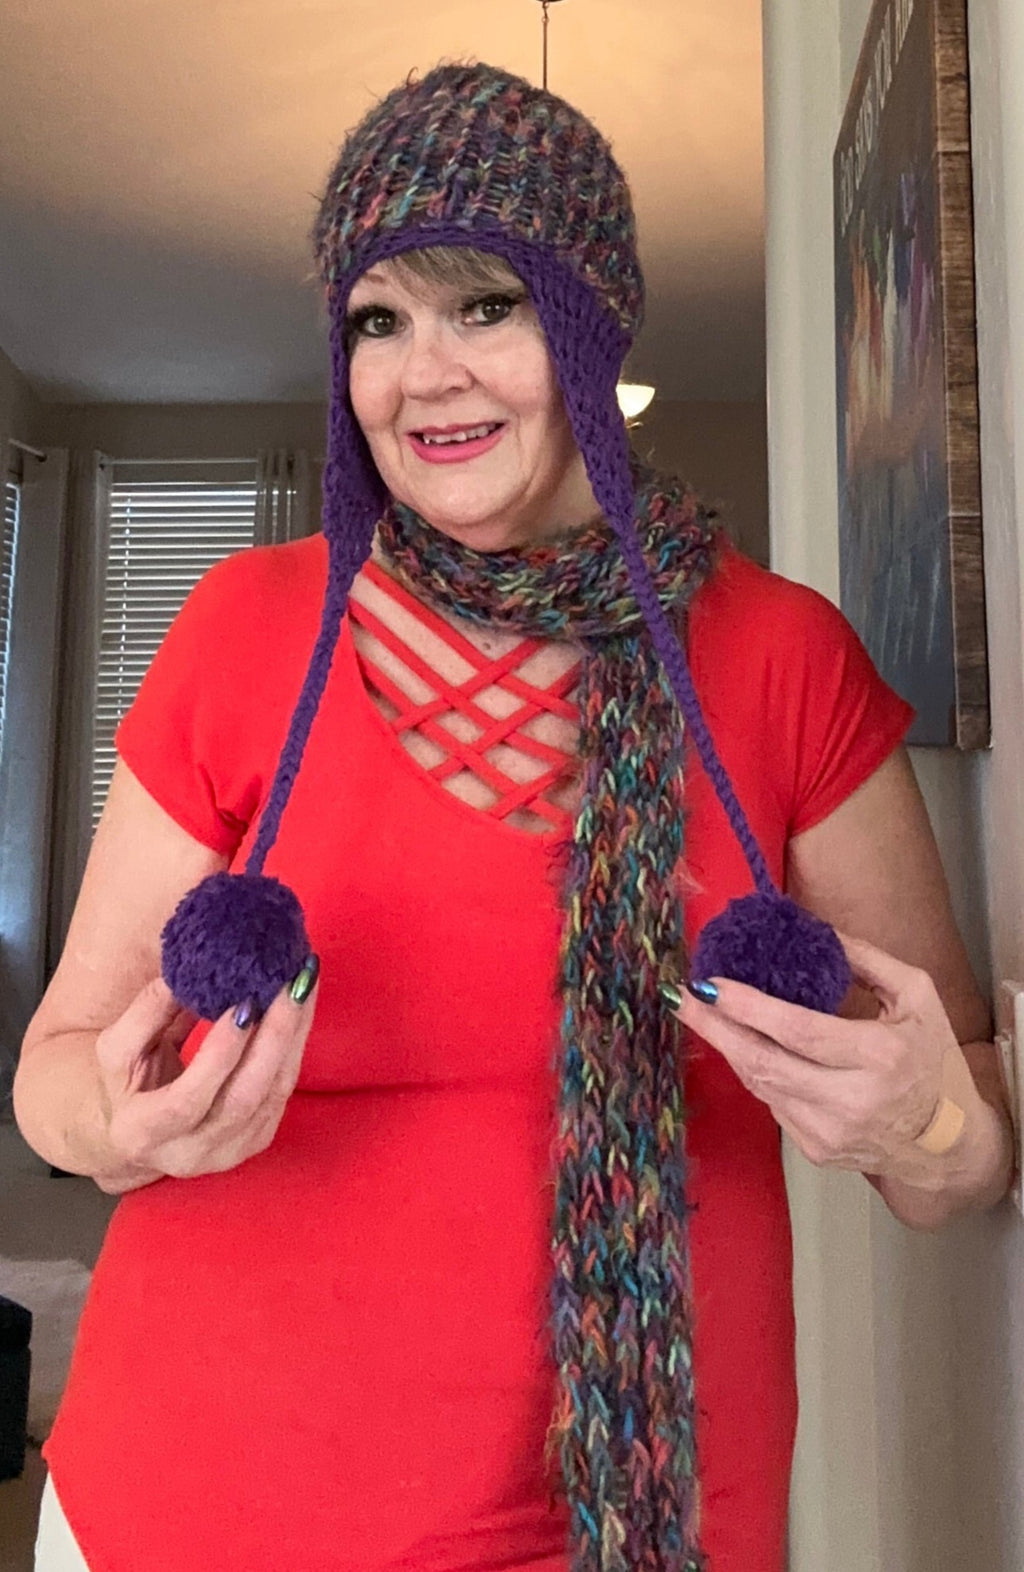 Multi-Colored Purple & Turquoise Hand Crocheted Ear Flap Hat w/ Pom Poms w/ Matching Scarf